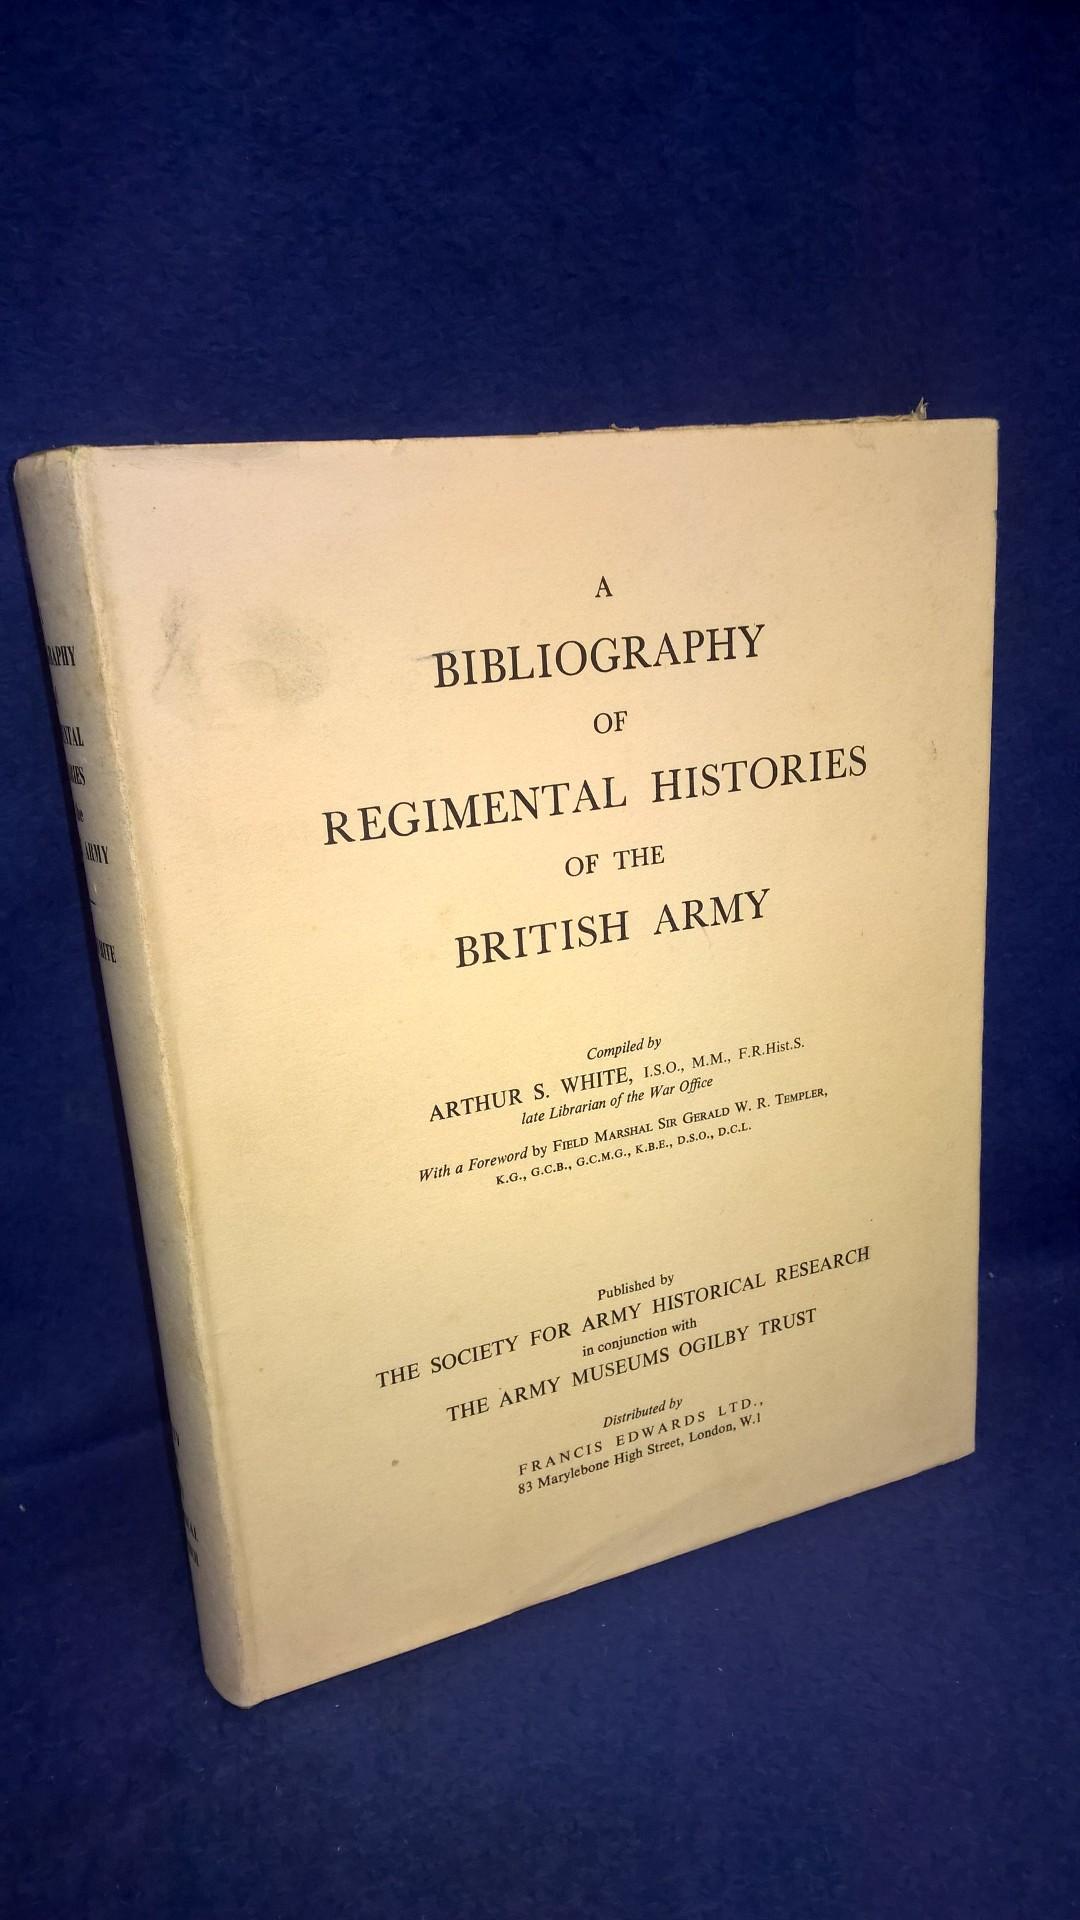 A Bibliography of Regimental Histories of the British Army.